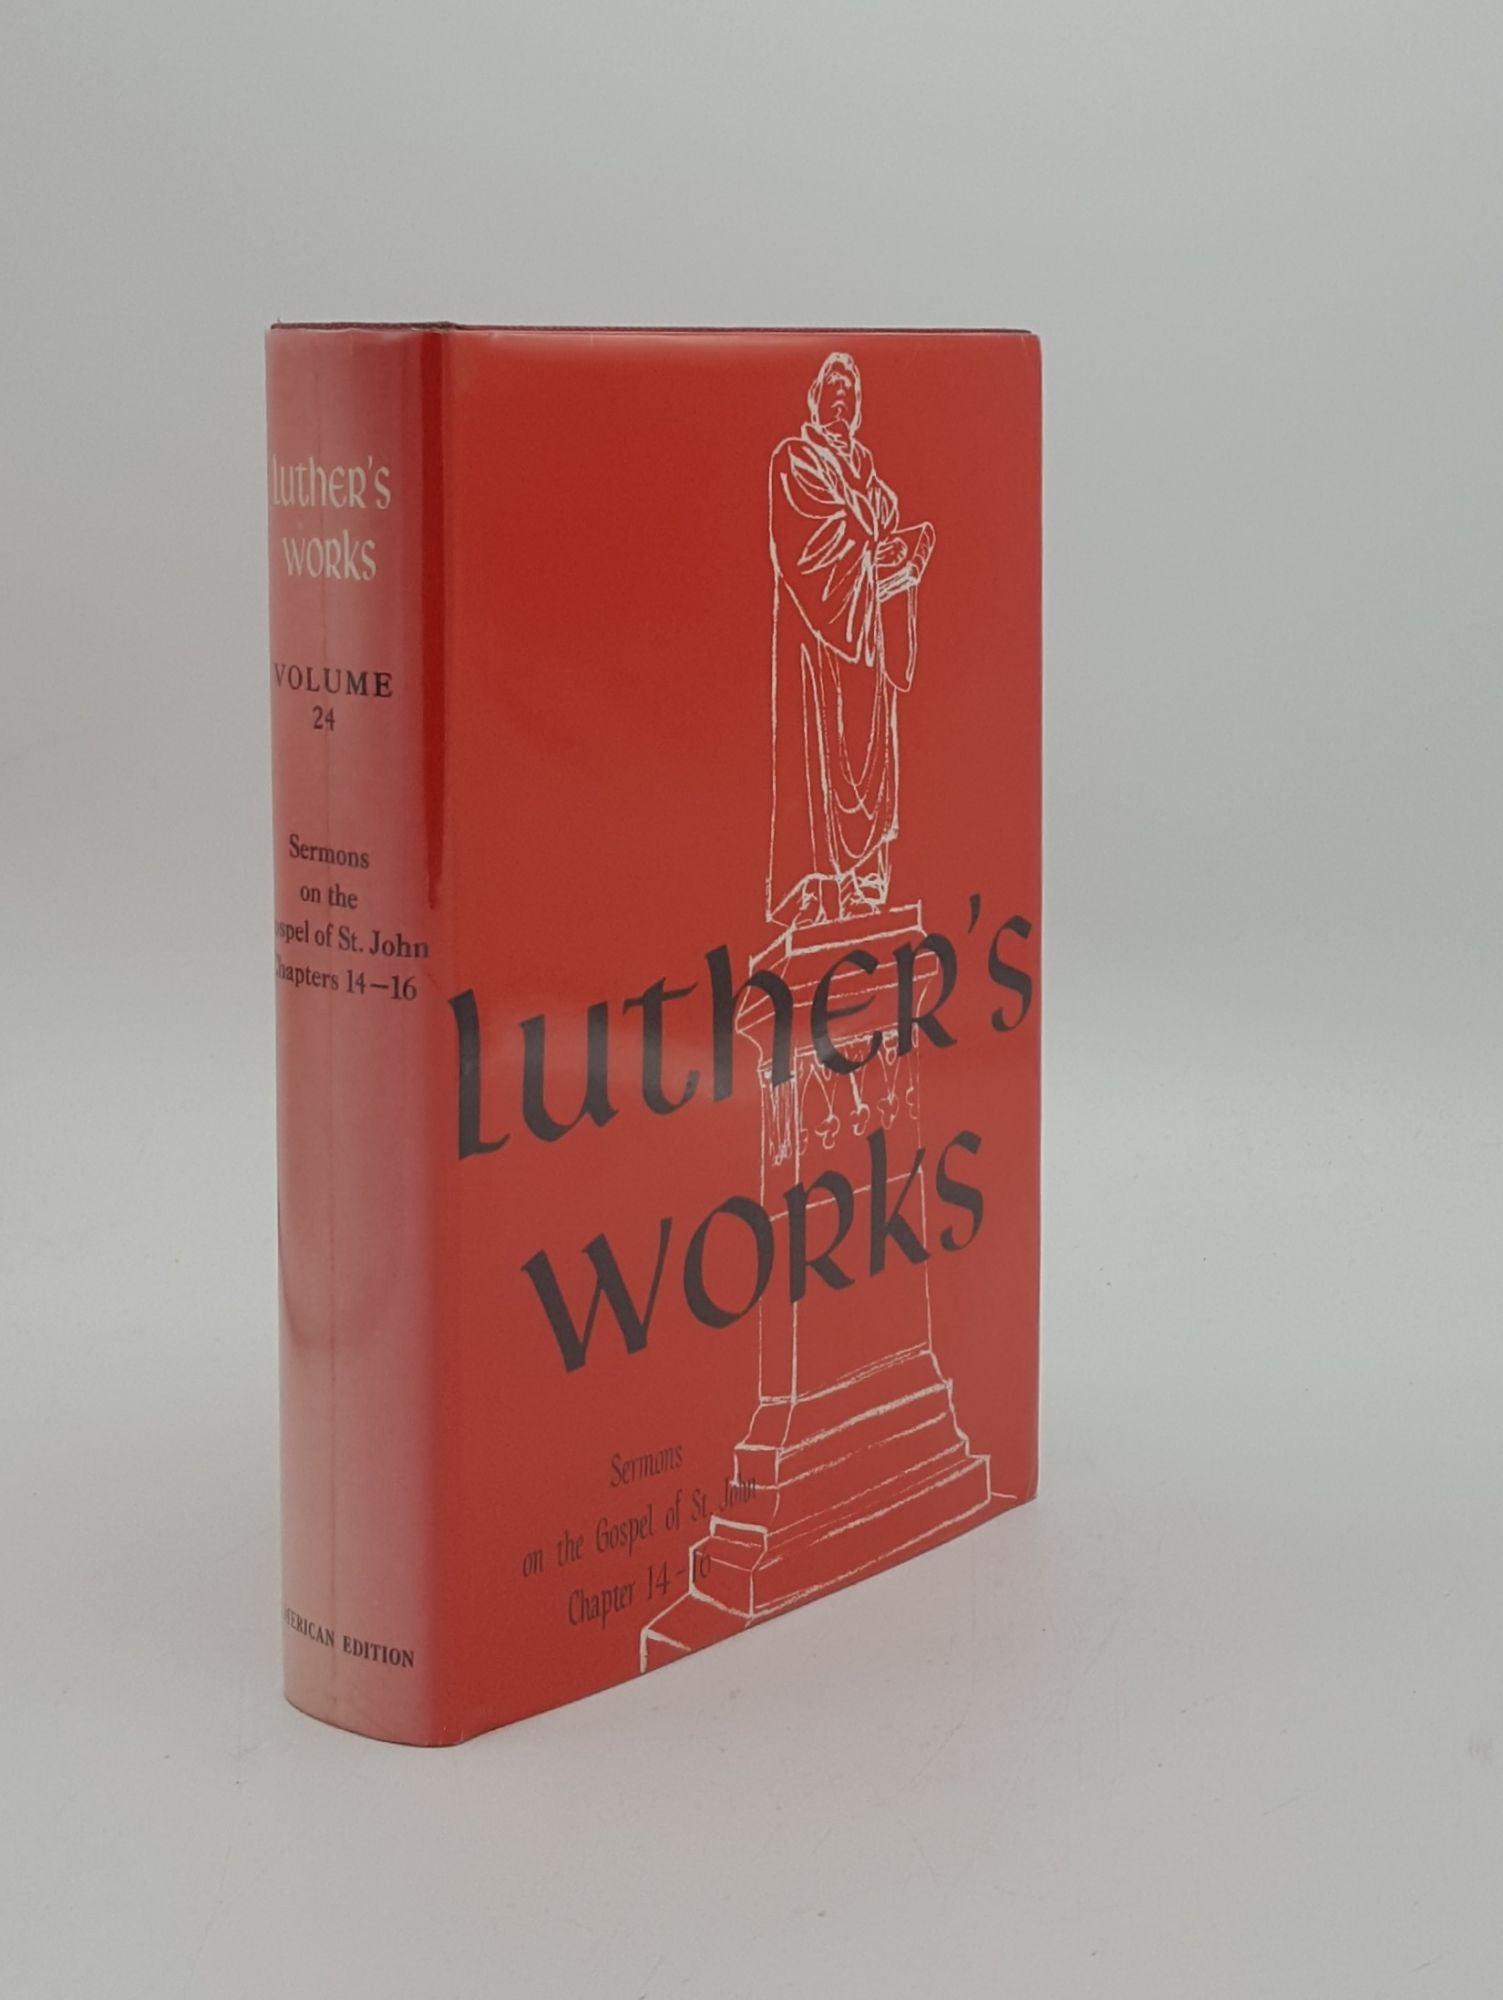 PELIKAN Jaroslav - Luther's Works Volume 24 Lectures on the Gospel of St John Chapters 14-16